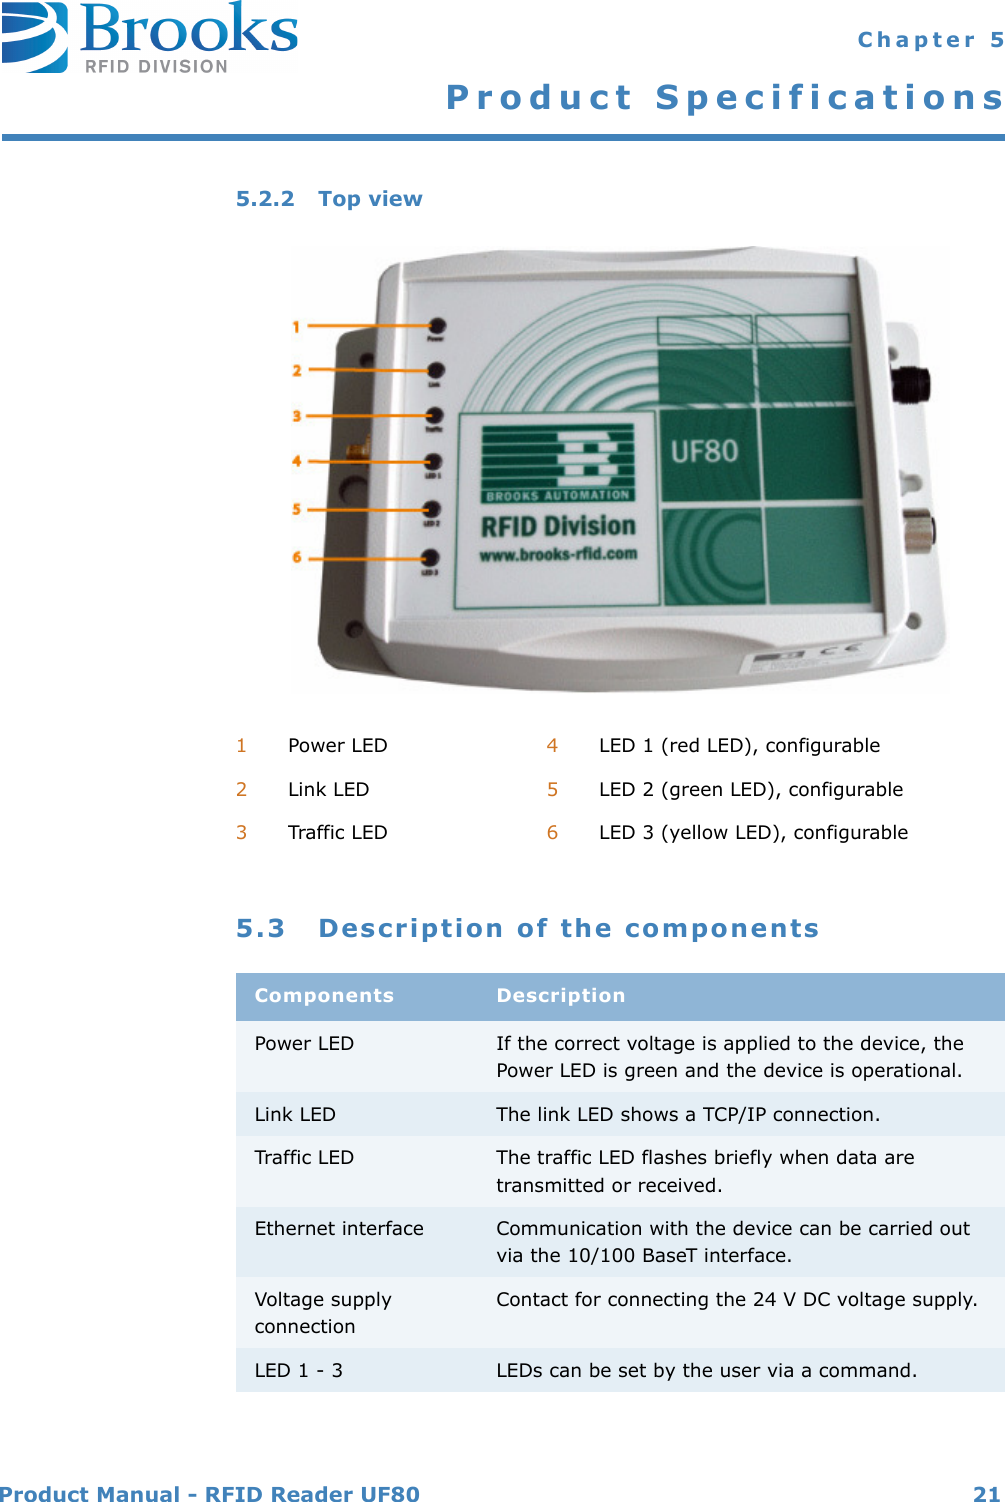 Product Manual - RFID Reader UF80 21 Chapter 5Product Specifications5.2.2 Top view5.3 Description of the components1Power LED 4LED 1 (red LED), configurable2Link LED 5LED 2 (green LED), configurable3Traffic LED 6LED 3 (yellow LED), configurableComponents DescriptionPower LED If the correct voltage is applied to the device, the Power LED is green and the device is operational.Link LED The link LED shows a TCP/IP connection.Traffic LED The traffic LED flashes briefly when data are transmitted or received.Ethernet interface Communication with the device can be carried out via the 10/100 BaseT interface.Voltage supply connectionContact for connecting the 24 V DC voltage supply.LED 1 - 3 LEDs can be set by the user via a command.nbb